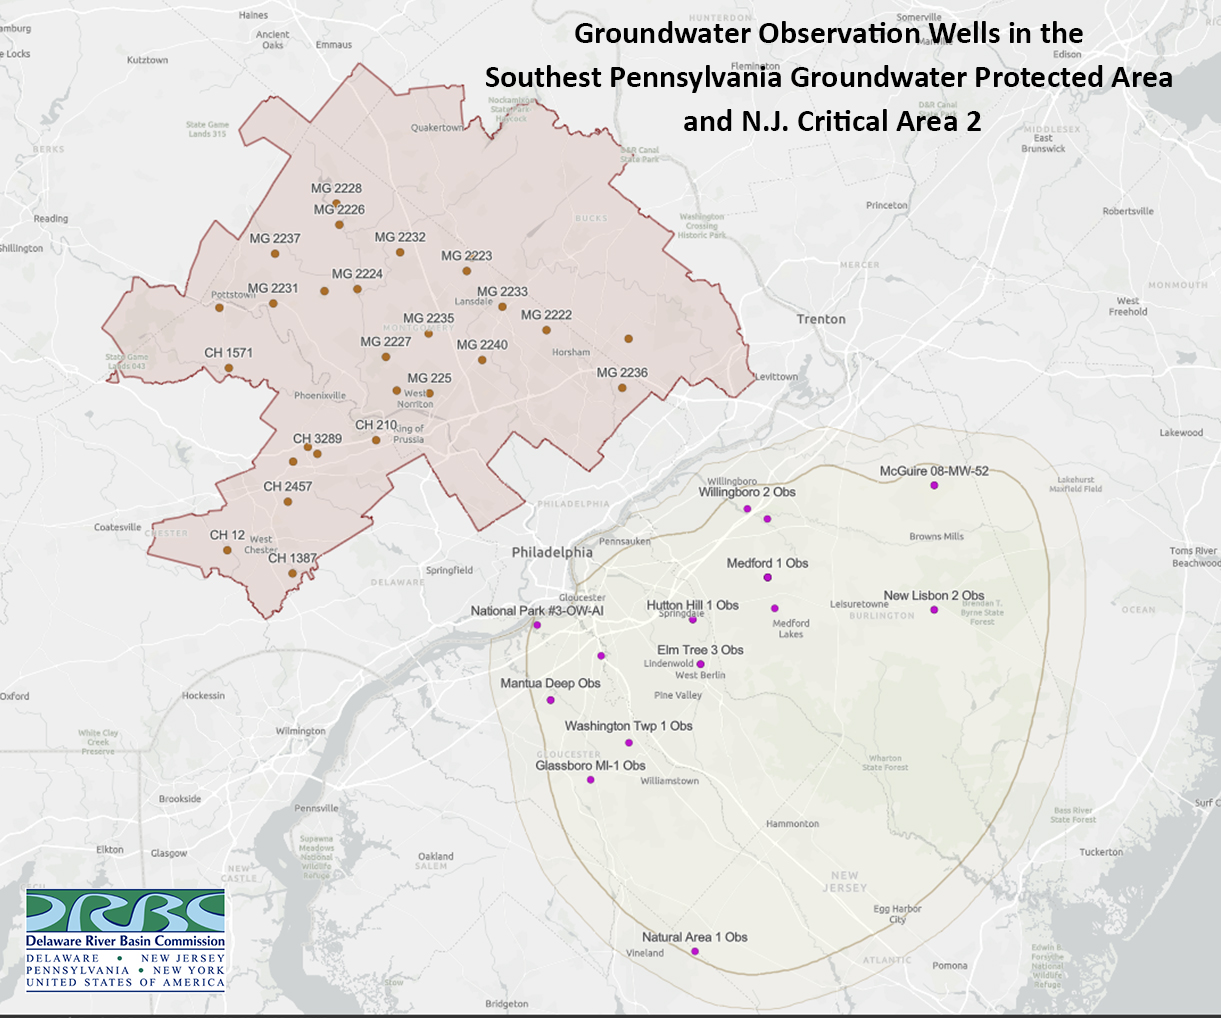 Groundwater Observation Wells in the GWPA and N.J. Critical Area #2. Graphic by the DRBC.